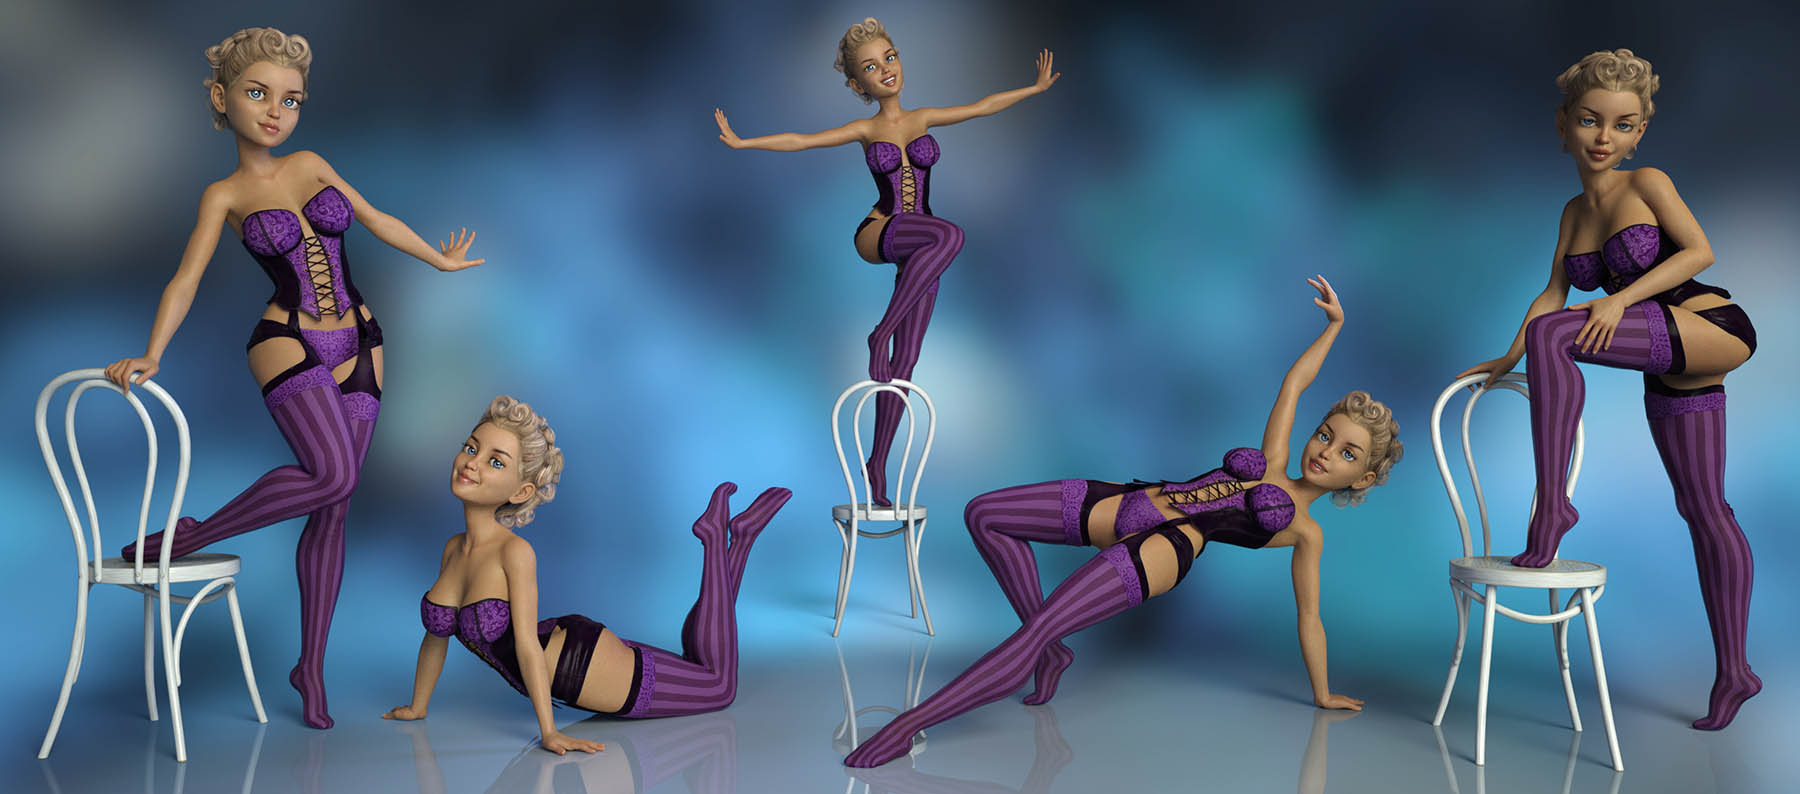 Burlesque Dance Poses for Genesis 8 Female and The Girl 8 by: Capsces Digital Ink, 3D Models by Daz 3D